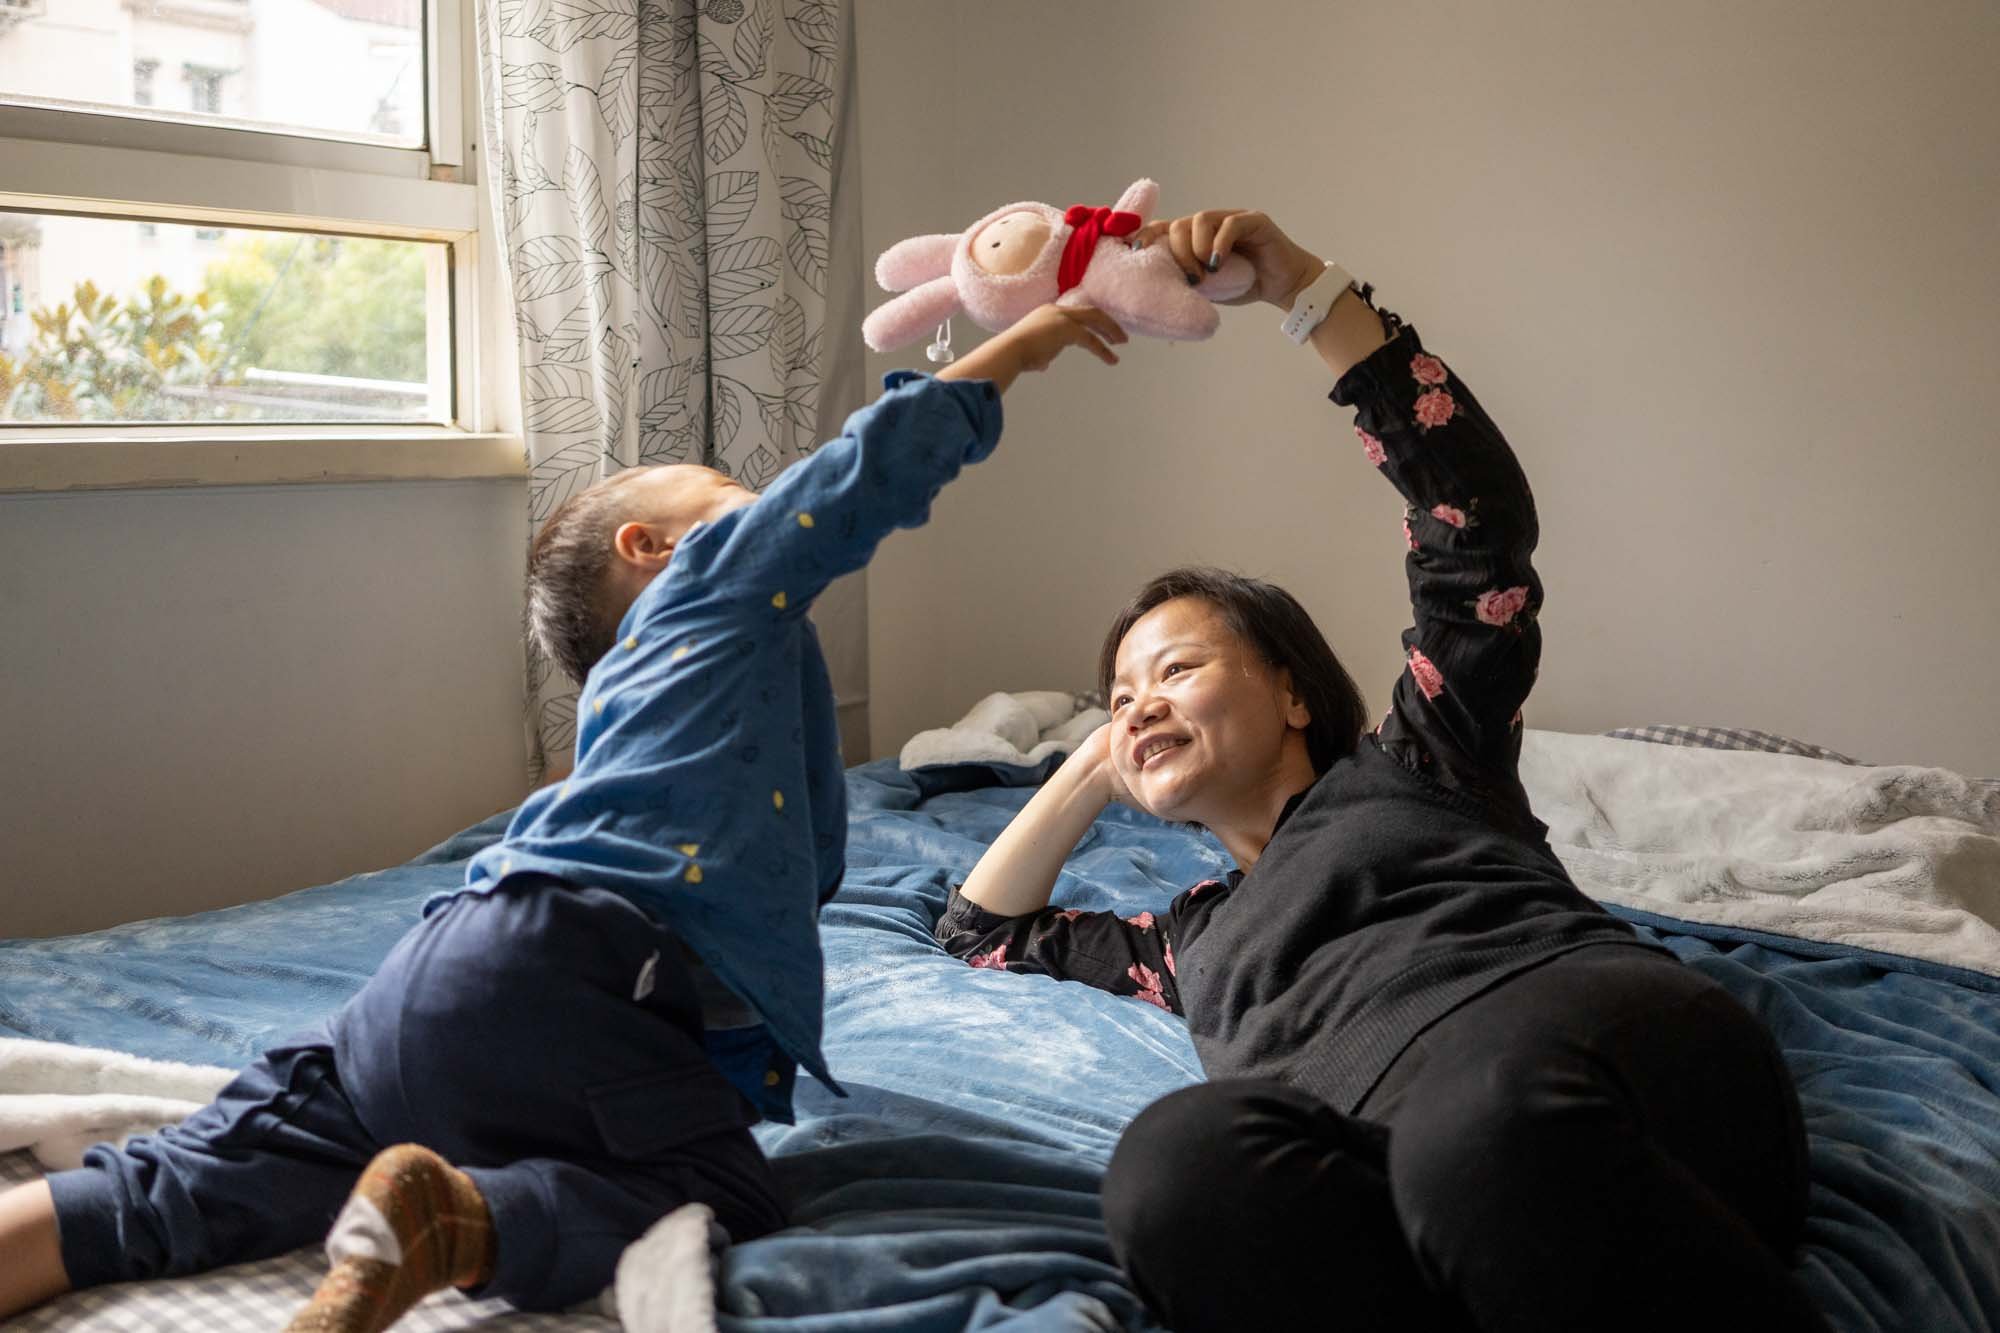  Yan and her son Yu in their apartment in Shanghai, China.She has been raise her son alone for the past 3 year after the divorce 